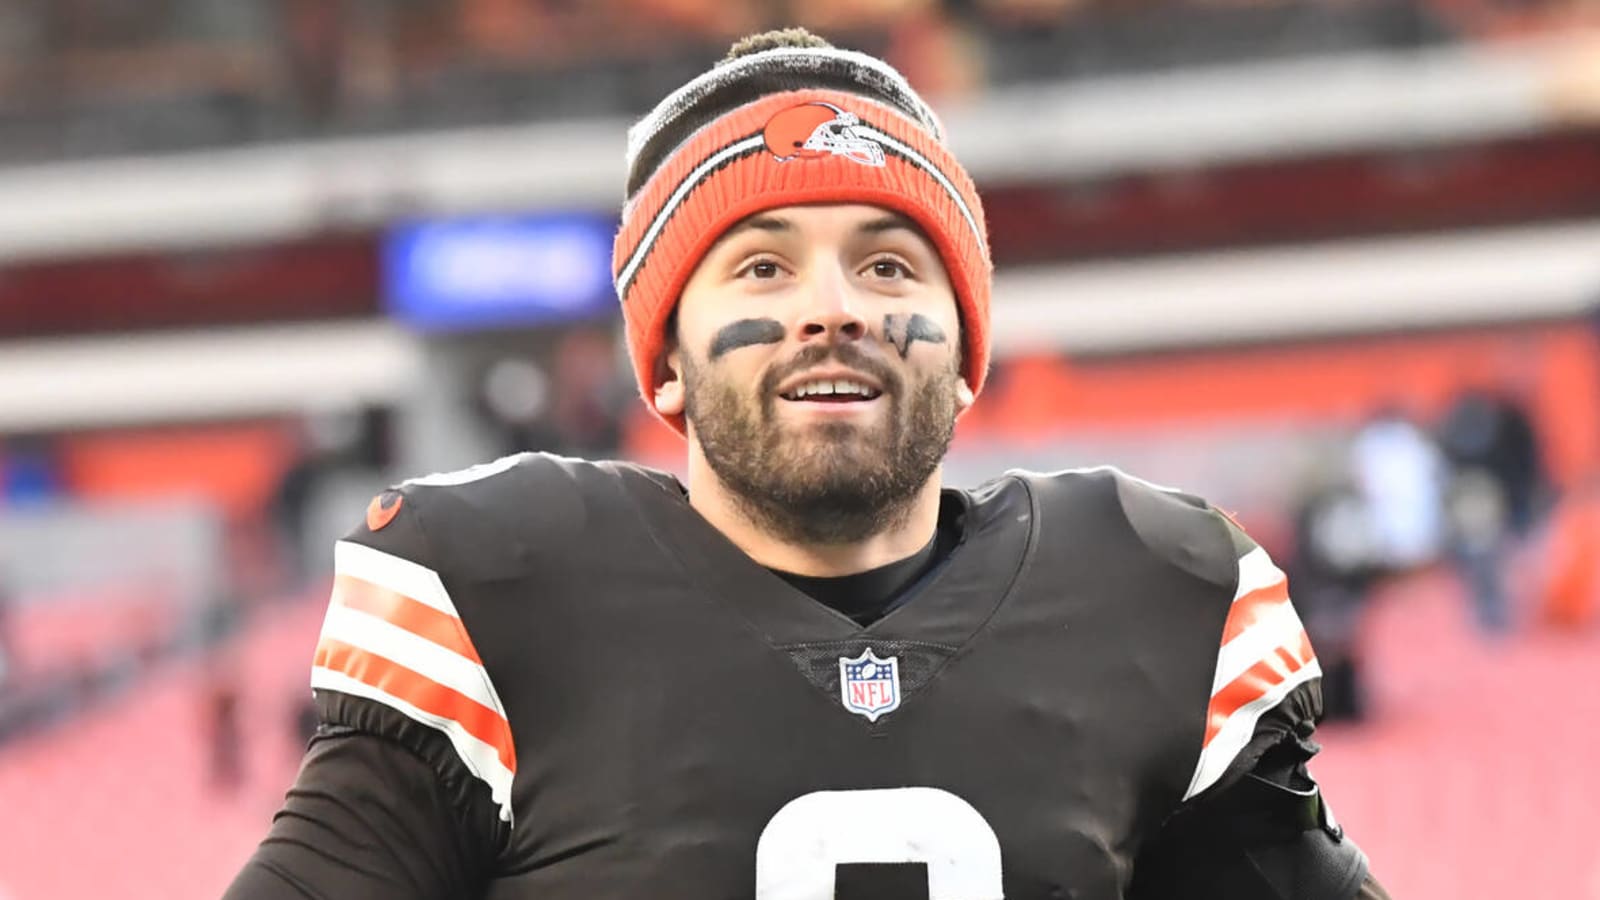 Report: Steelers would sign Baker Mayfield 'the next day' if Browns cut him